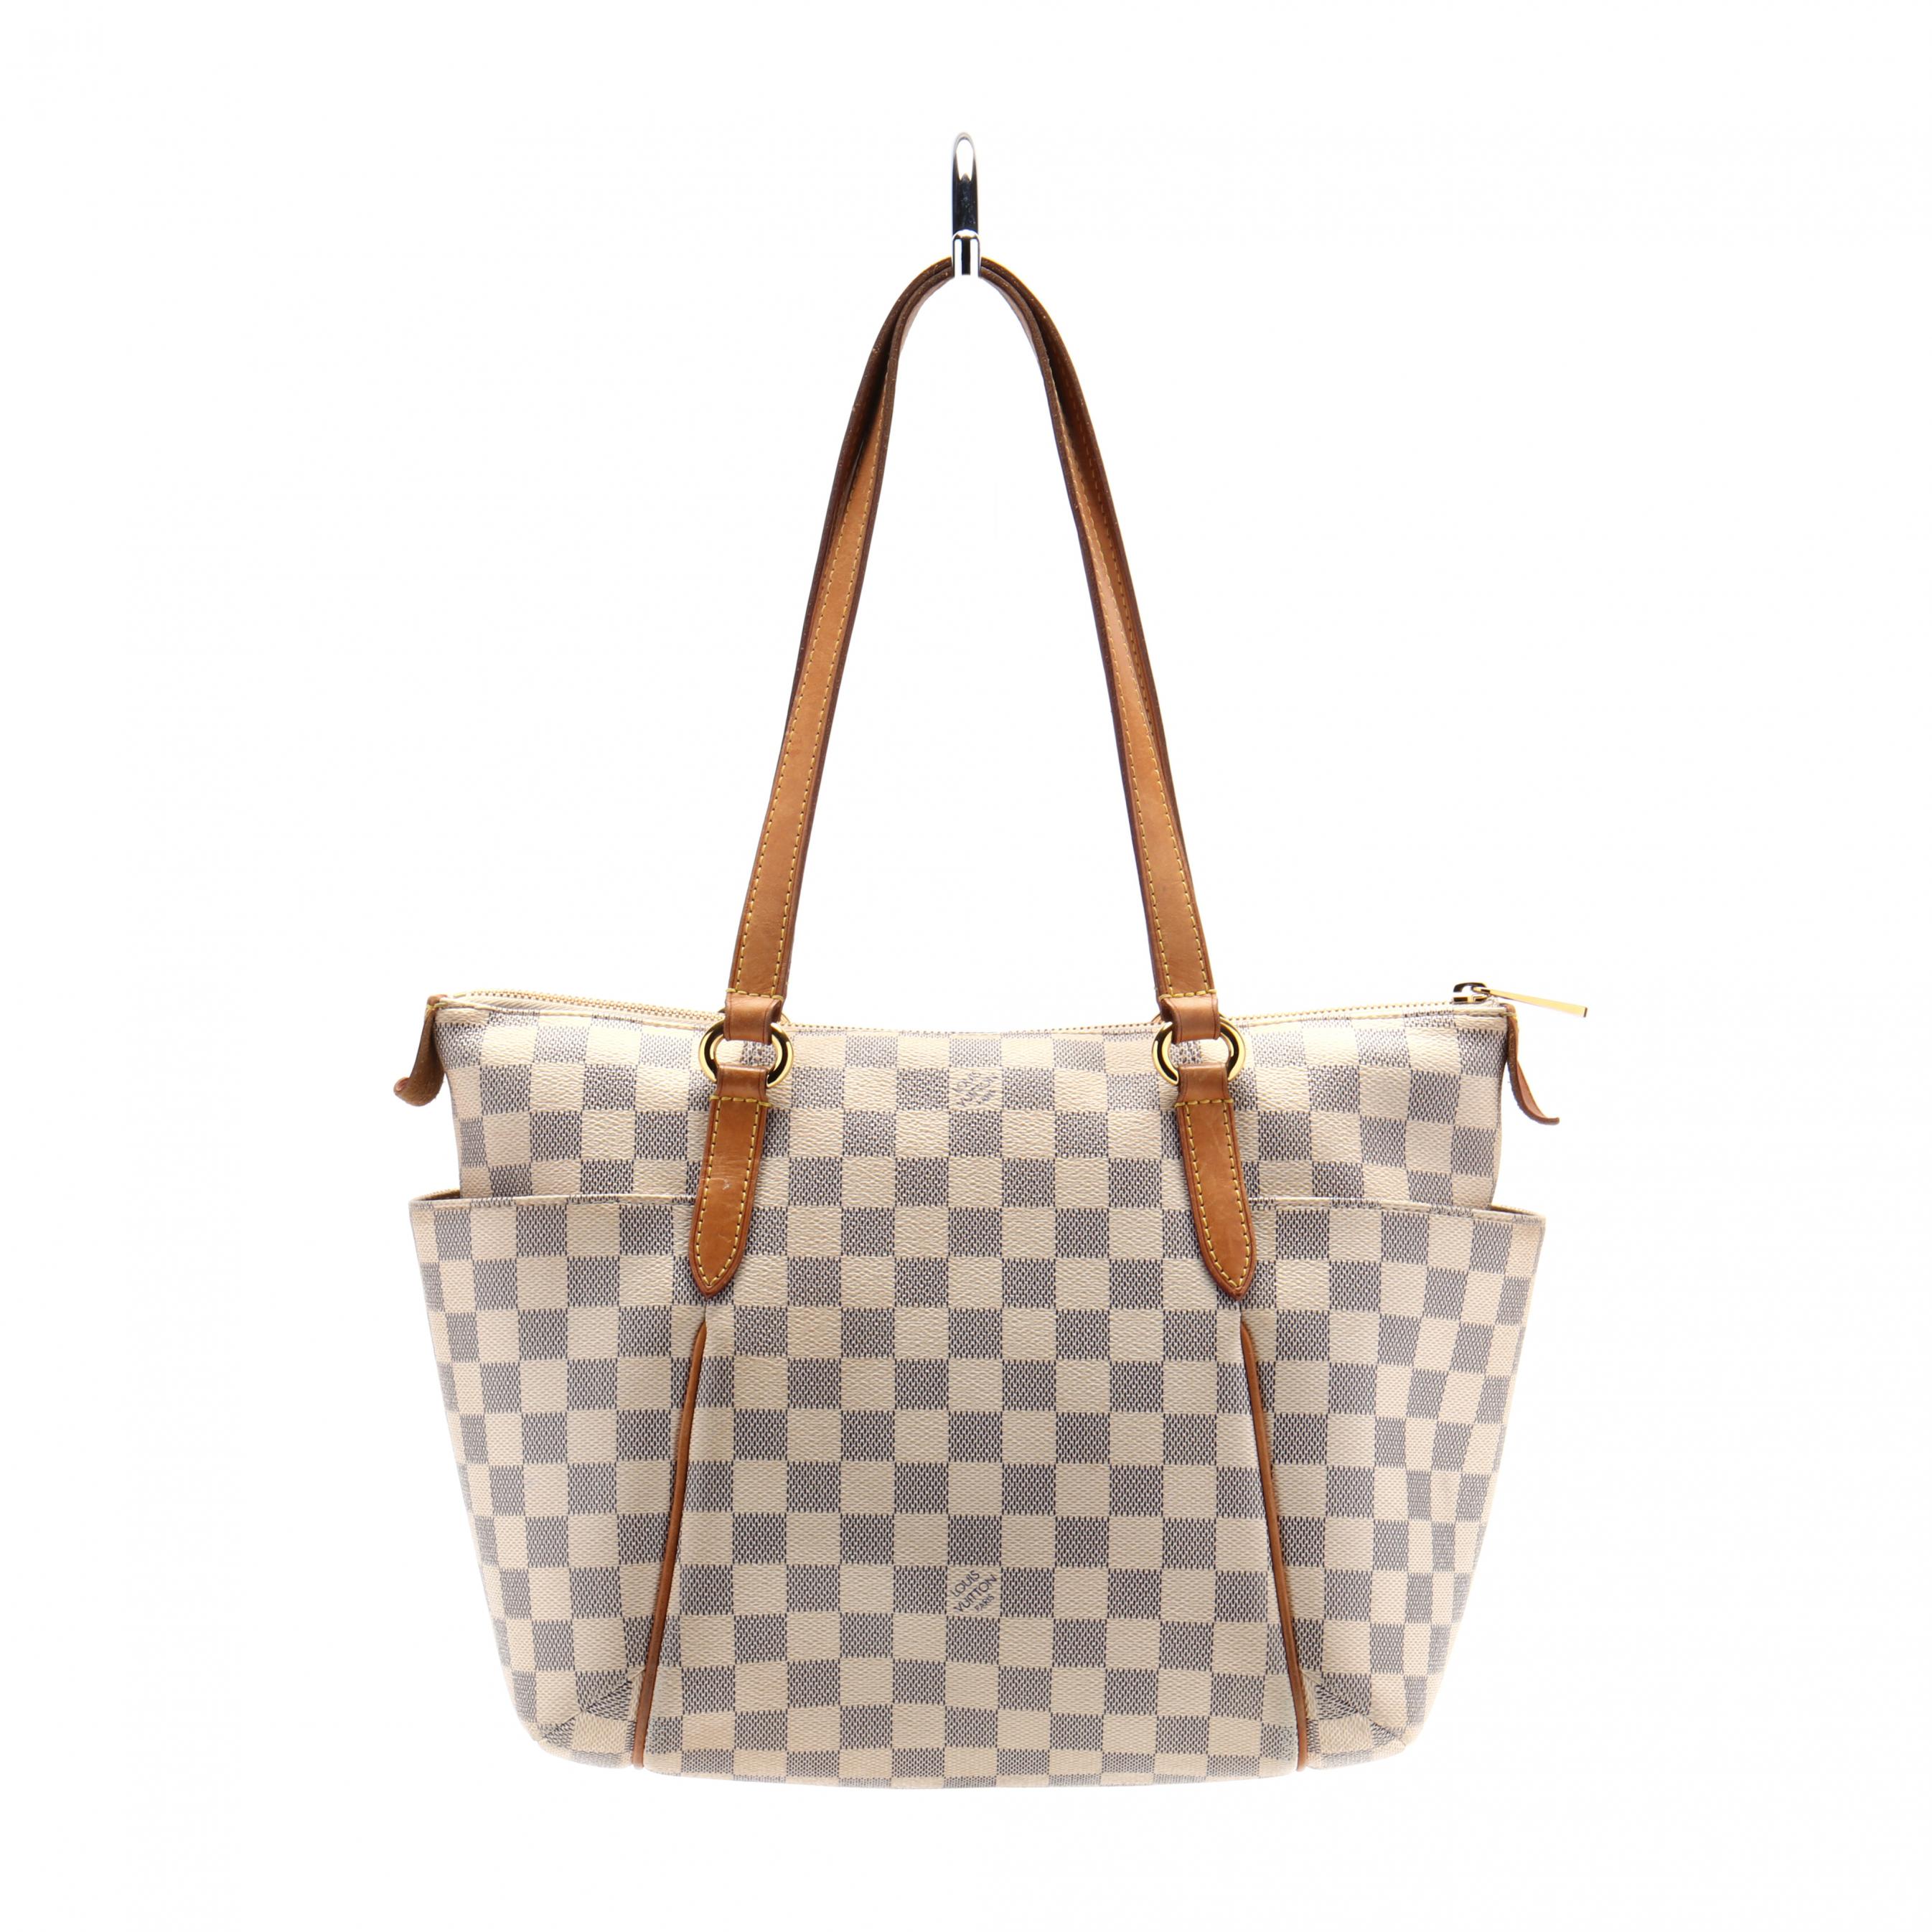 Sold at Auction: Louis Vuitton, NEW LOUIS VUITTON TOTALLY MM